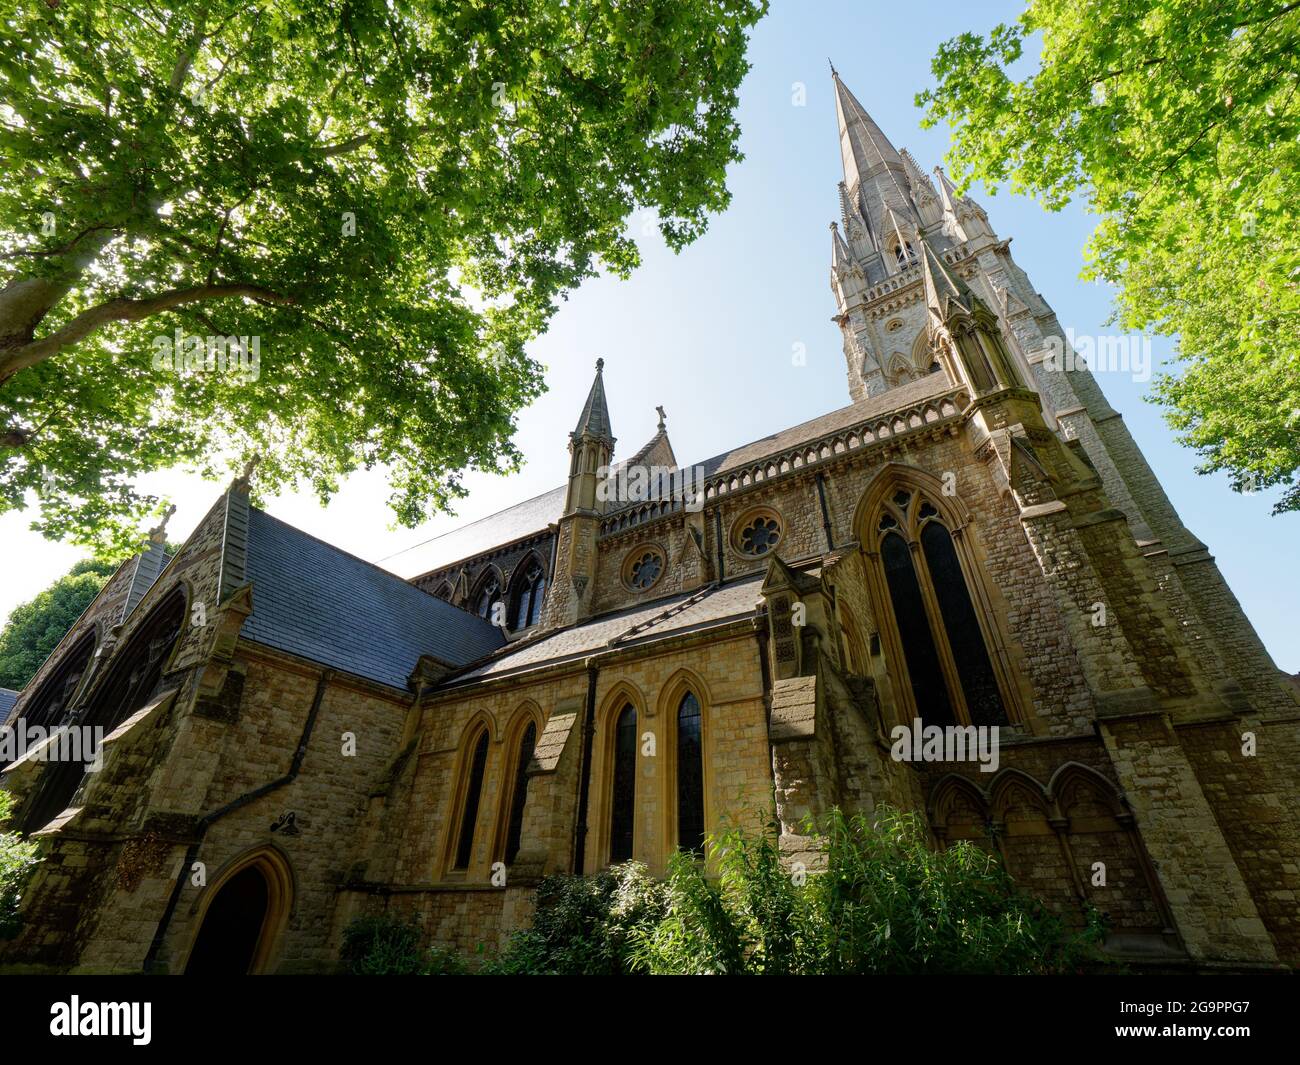 London, Greater London, England, July 17 2021: St Mary Abbot's church on the corner of High Street Kensington and Kensington Church Street. Stock Photo